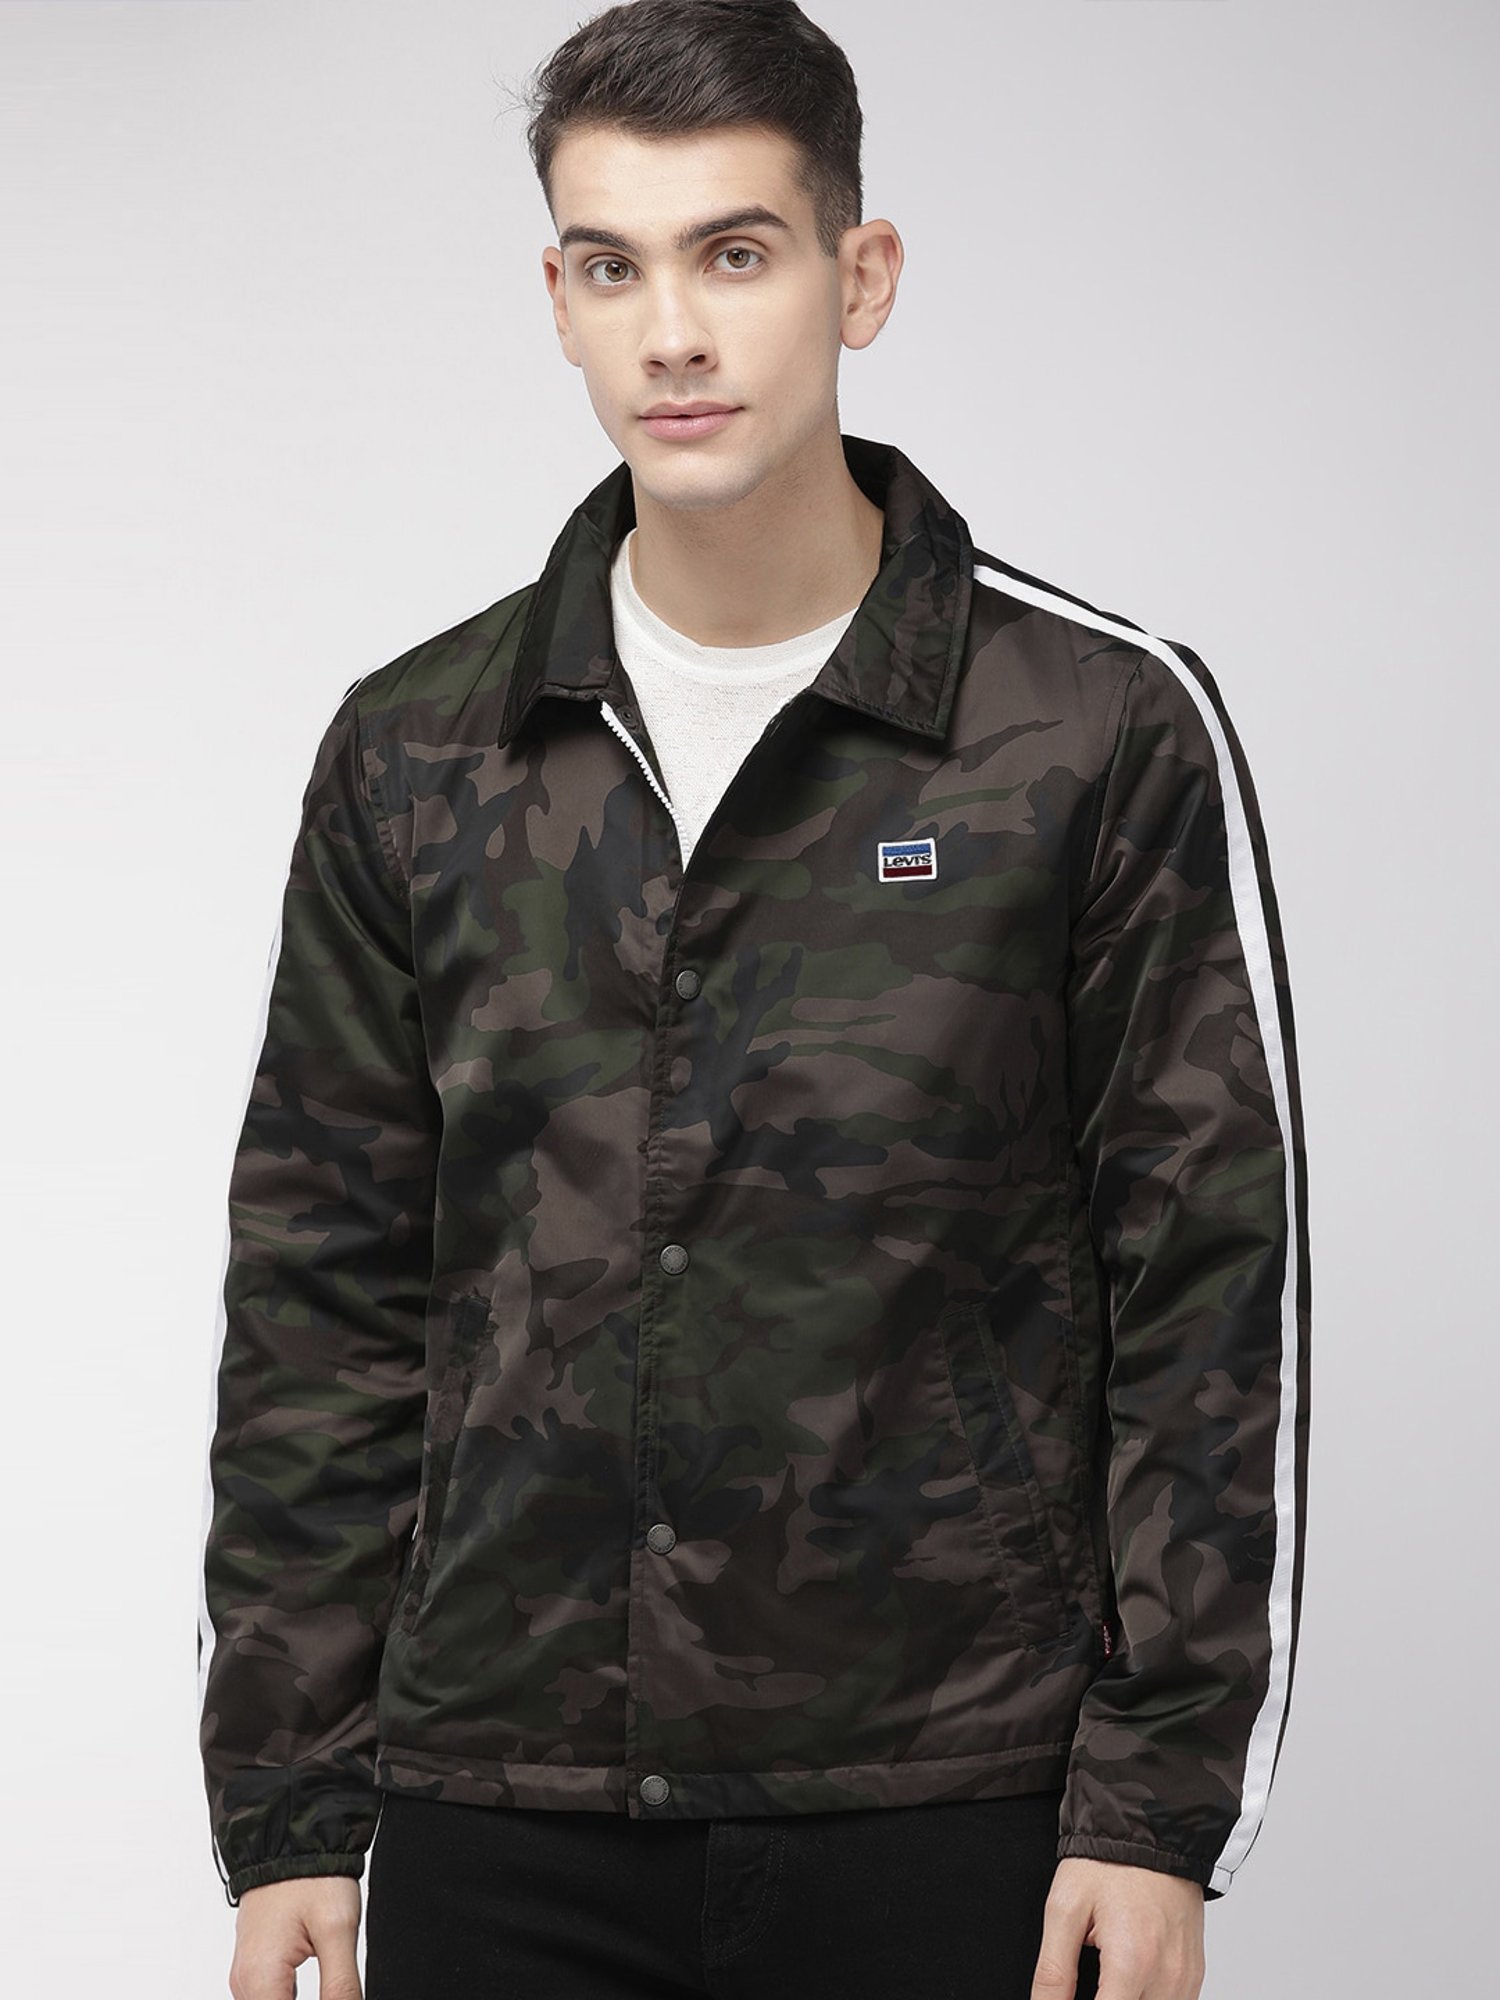 Buy LEVIS Mens Camouflage Jacket | Shoppers Stop